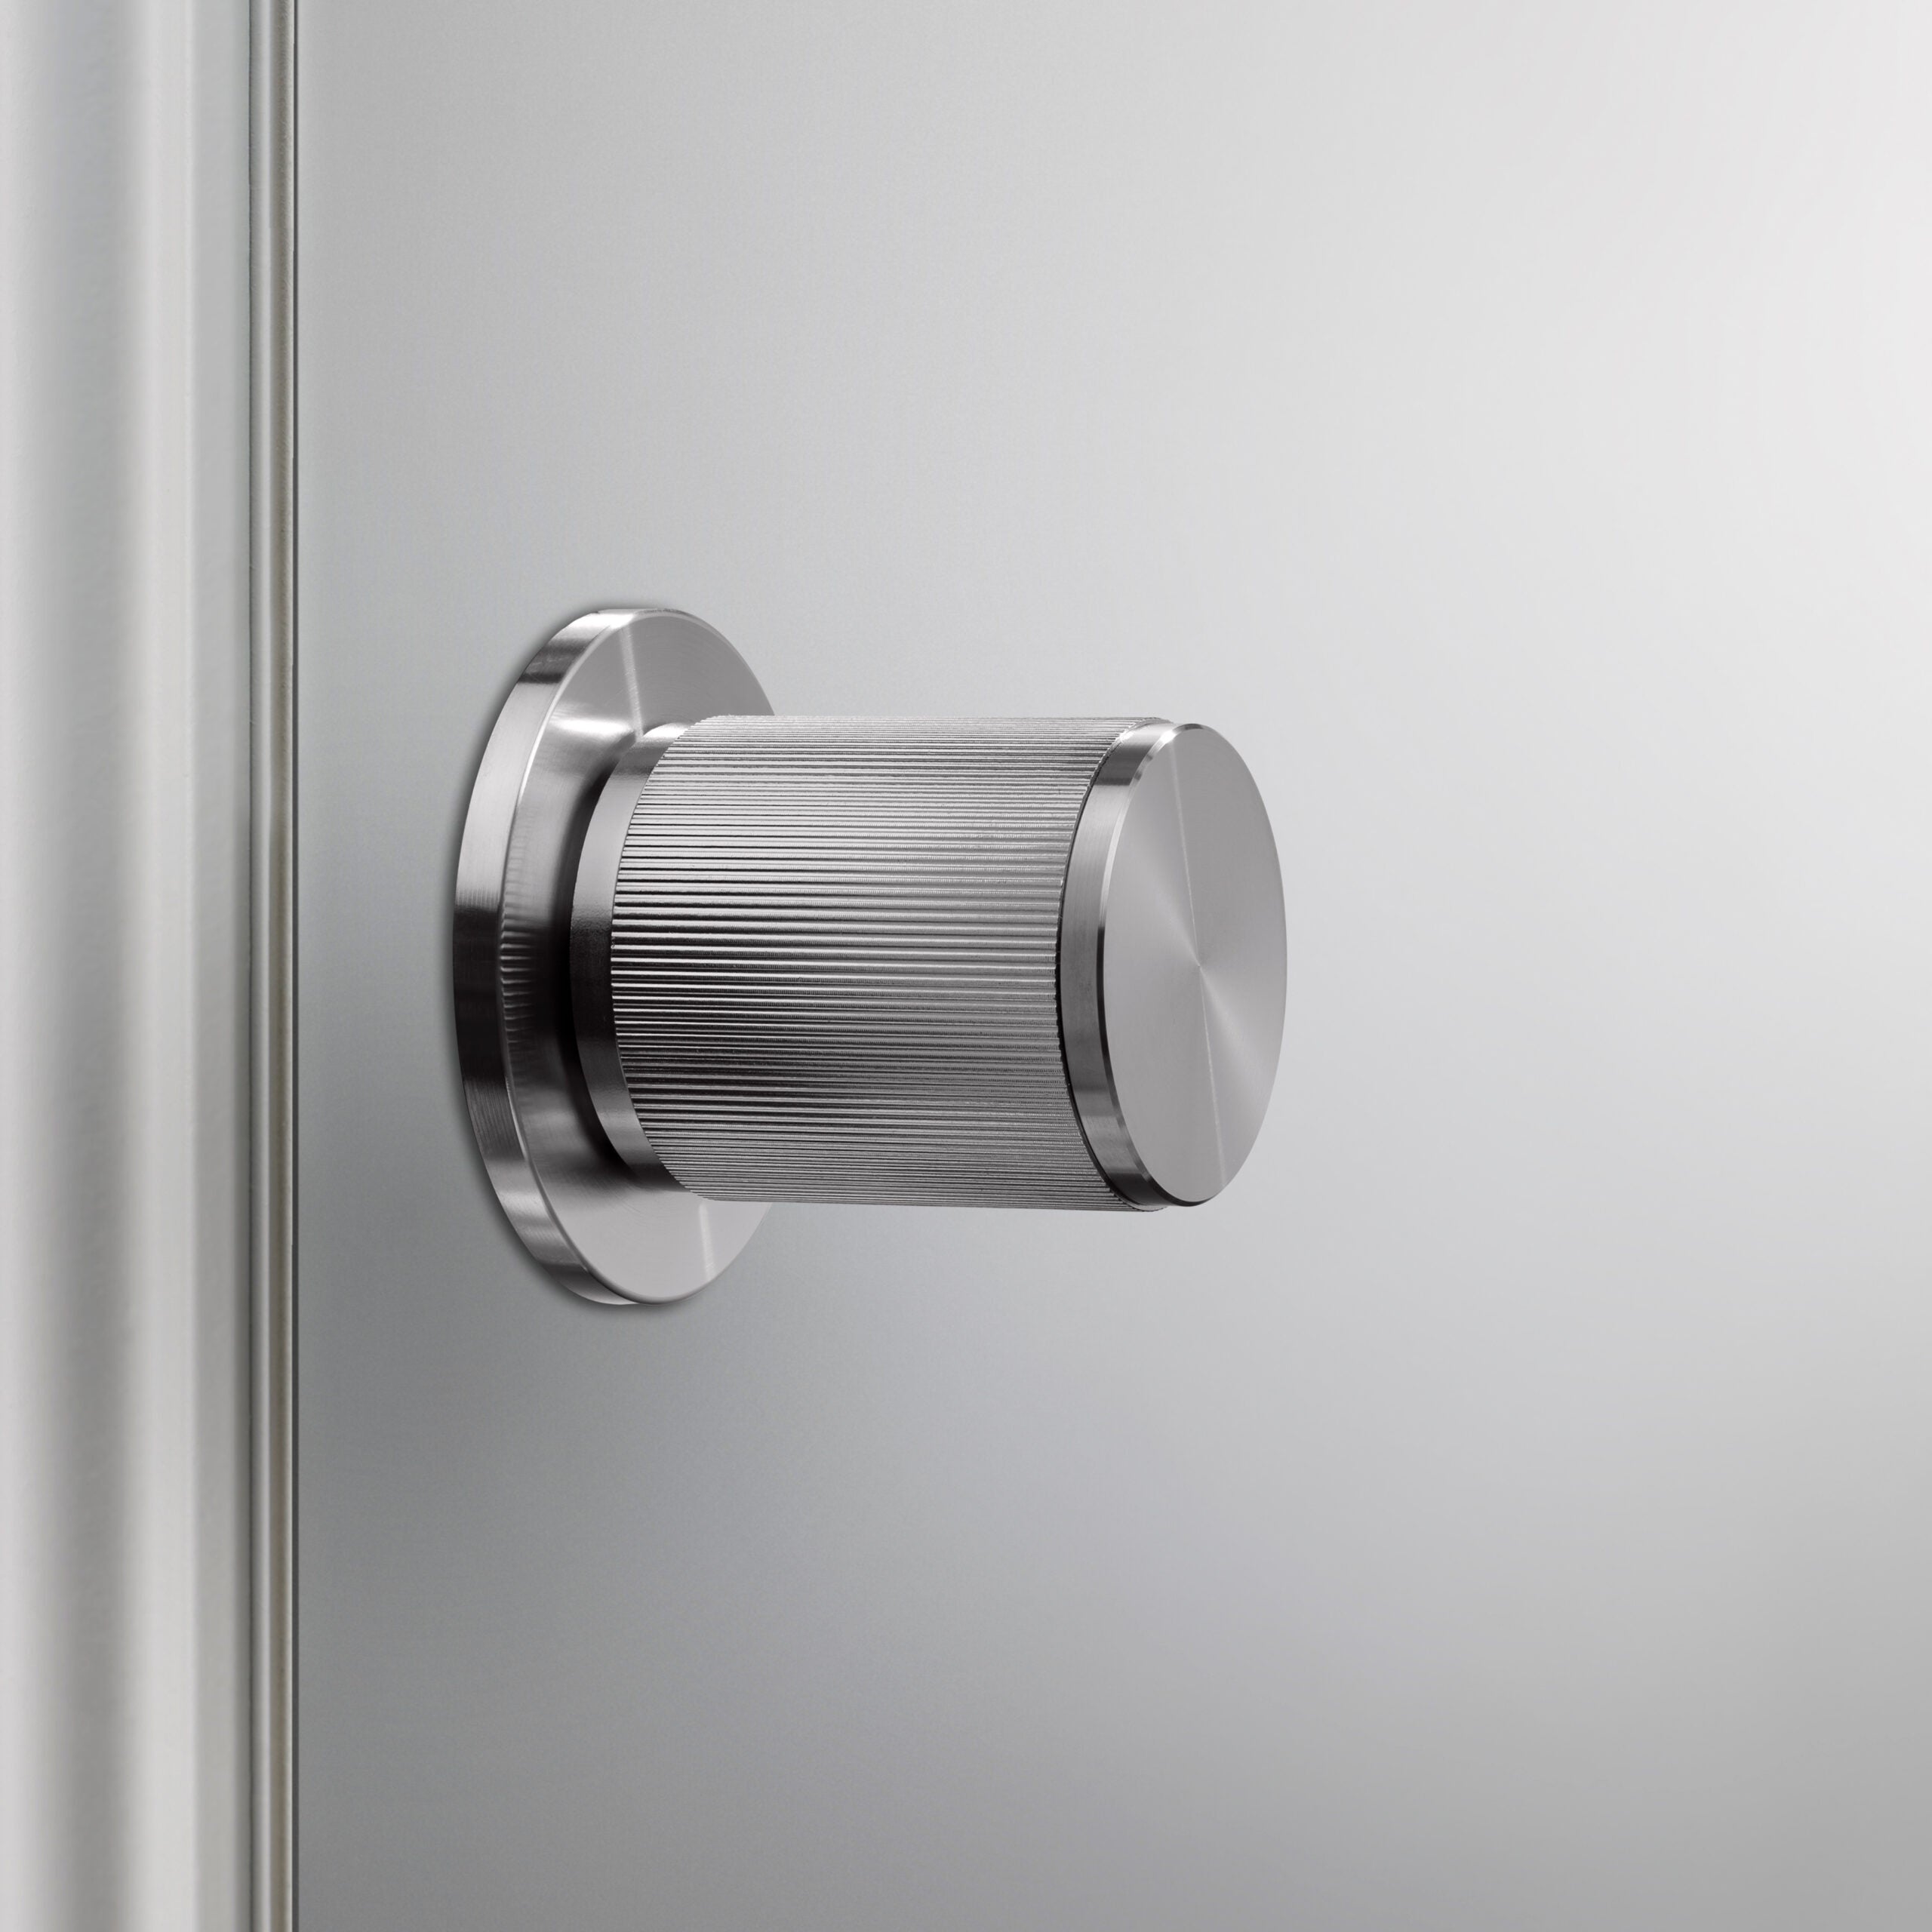 Buster + Punch Door Knob Single Sided, Linear Design, FIXED TYPE Hardware Buster + Punch   